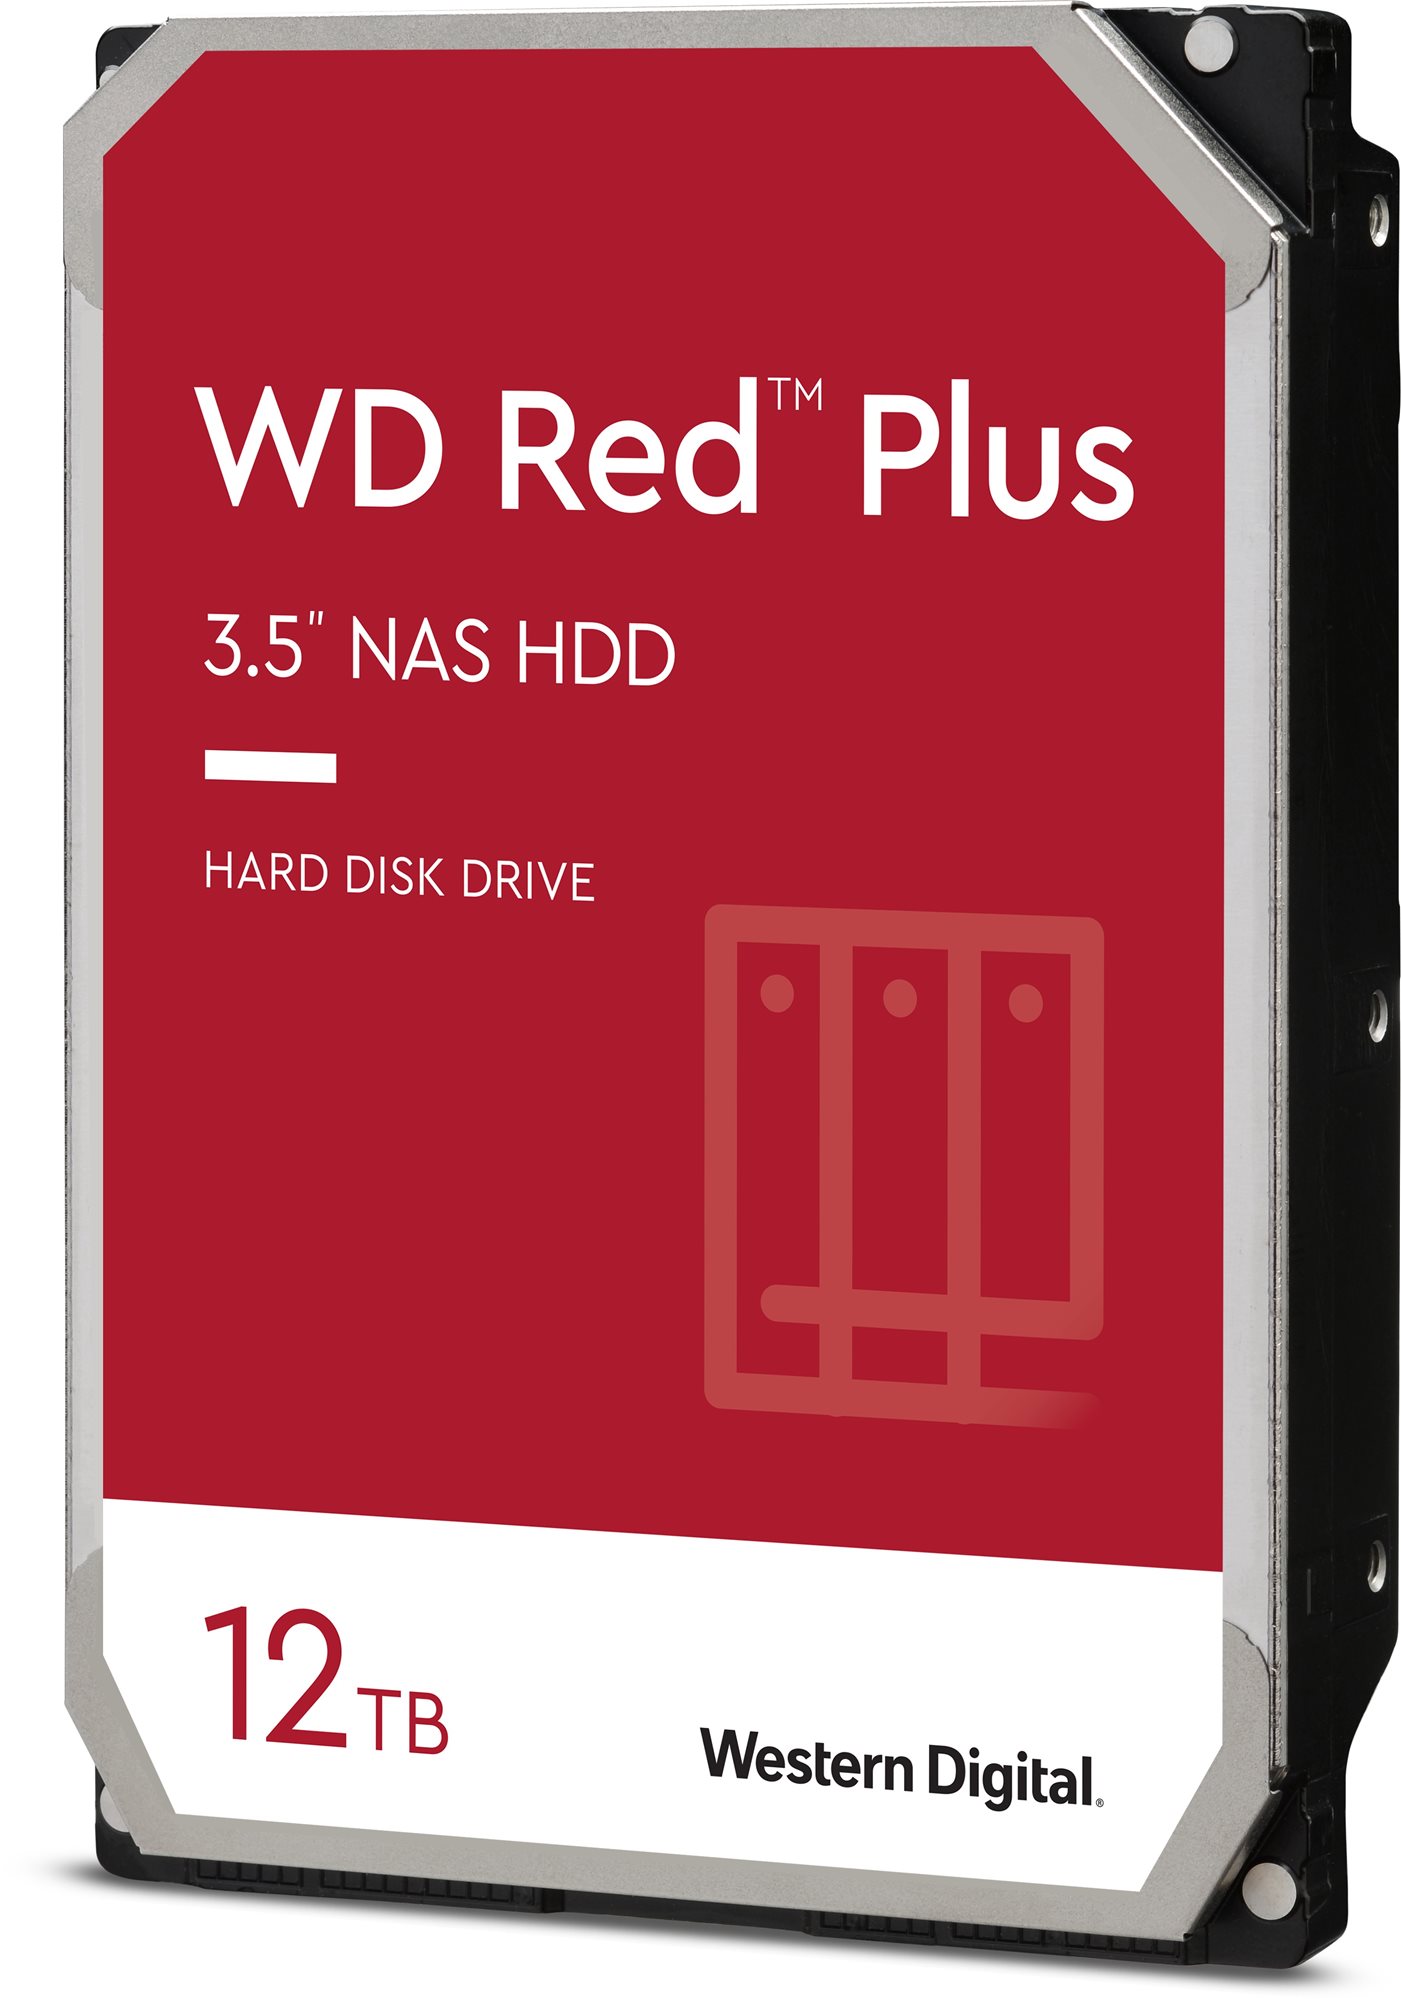 WD Red Plus 12 TB